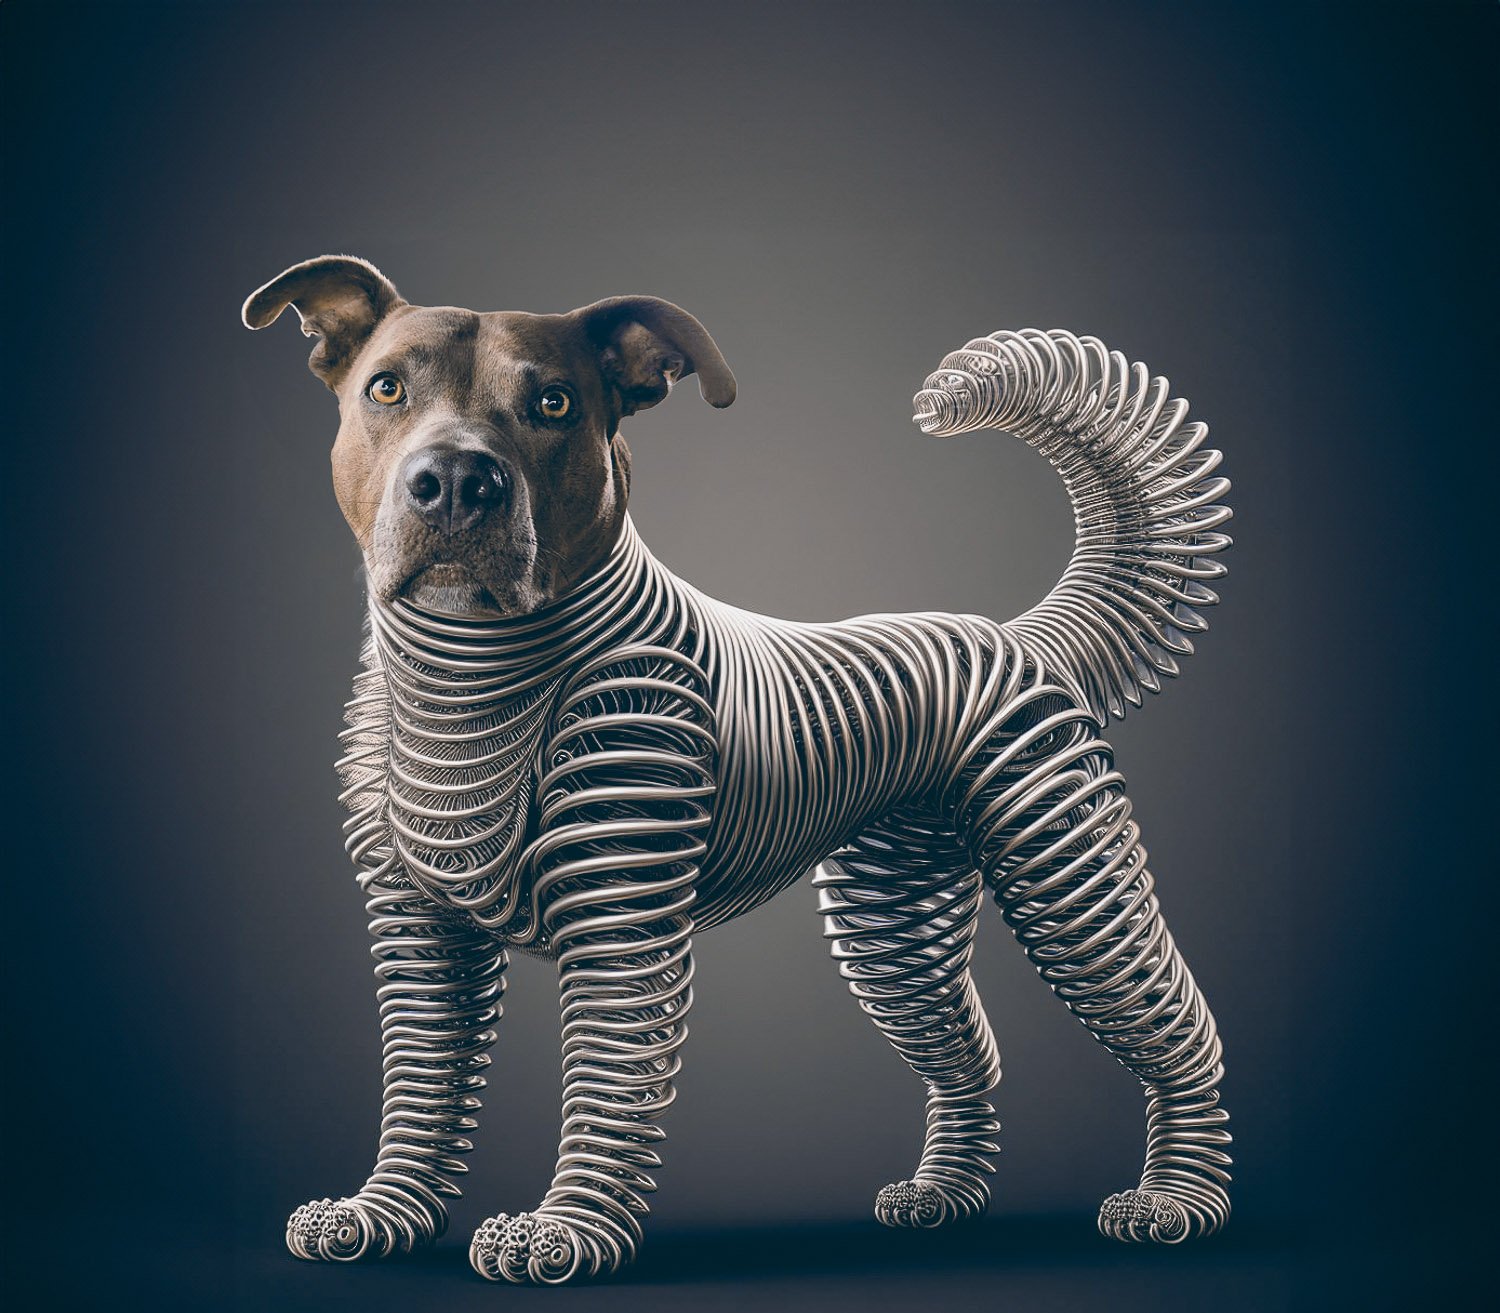 A staffie dog with a body made of steel springs